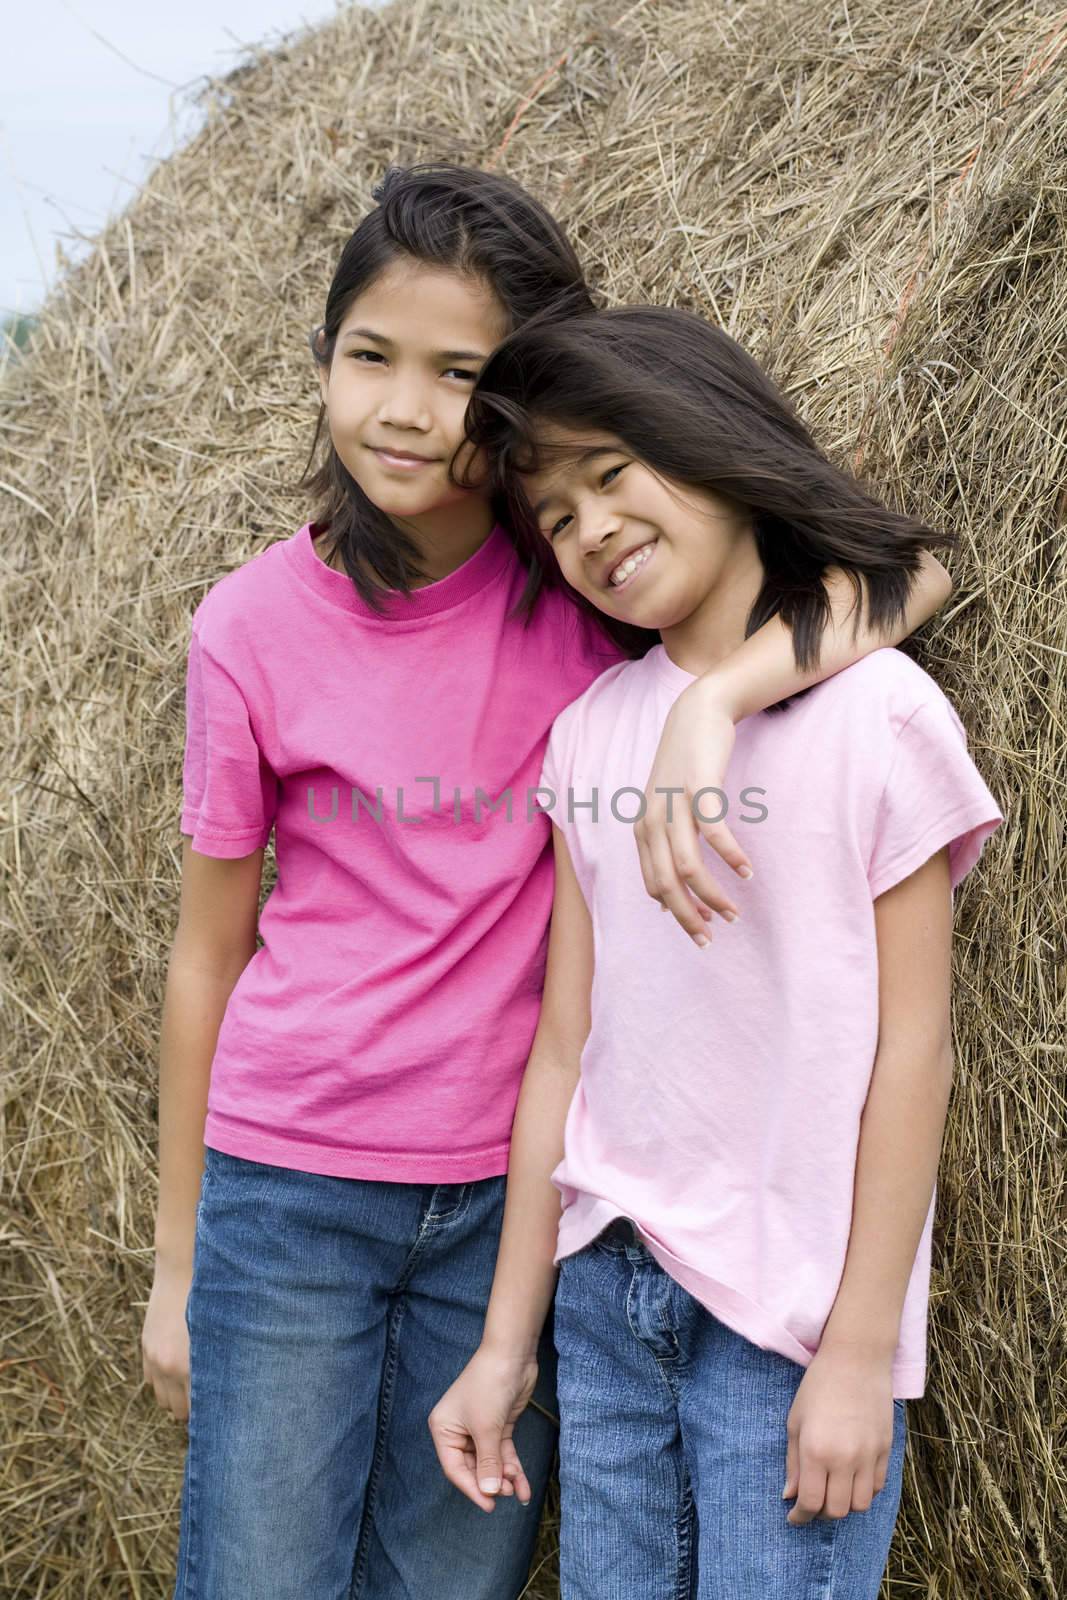 Two young girls standing against haybale